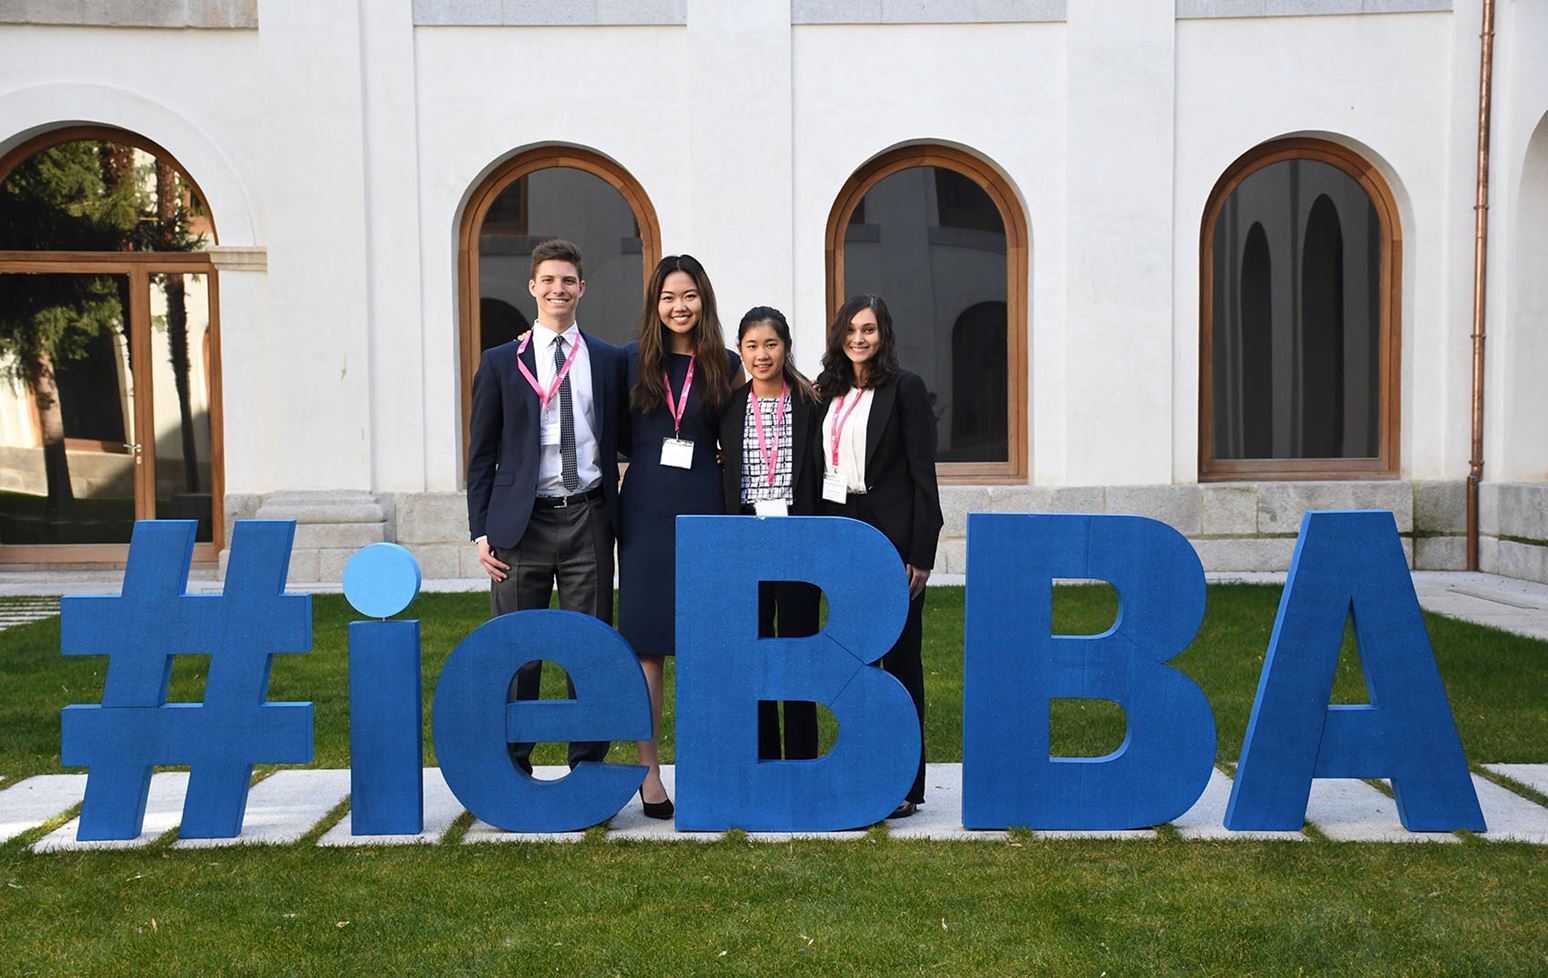 A Competition Abroad The Ie Business School a Business Challenge News Events